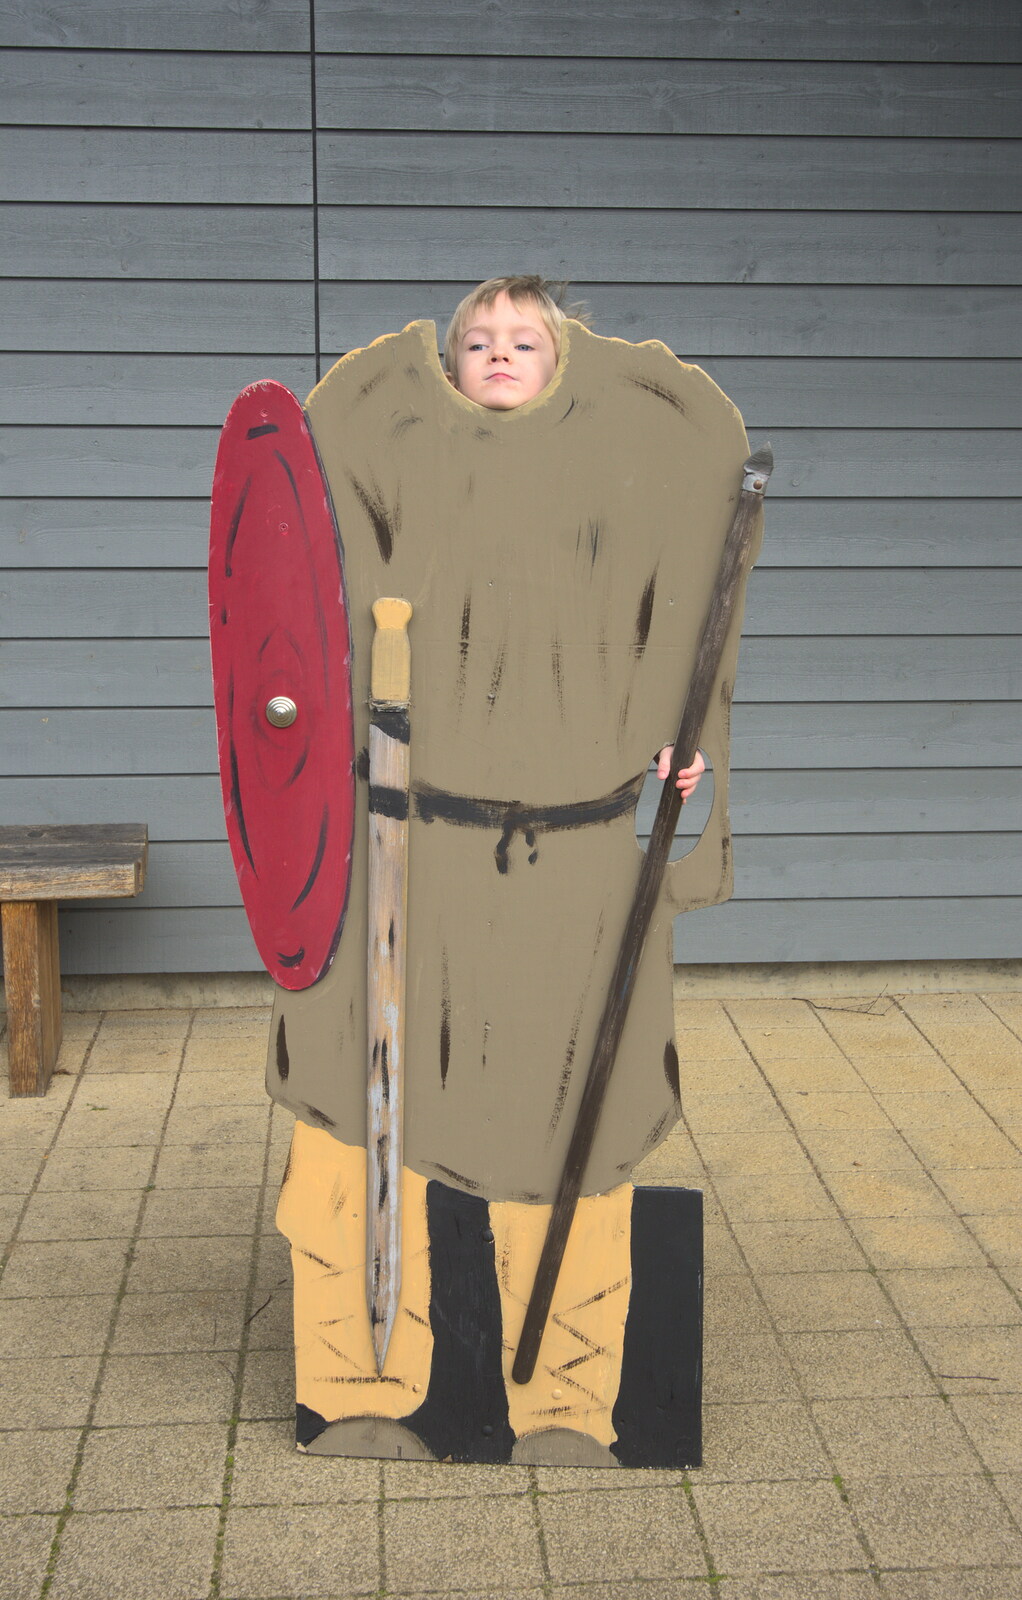 Harry's a bit too small for the cut-out from A Trip to Sutton Hoo, Woodbridge, Suffolk - 29th January 2017